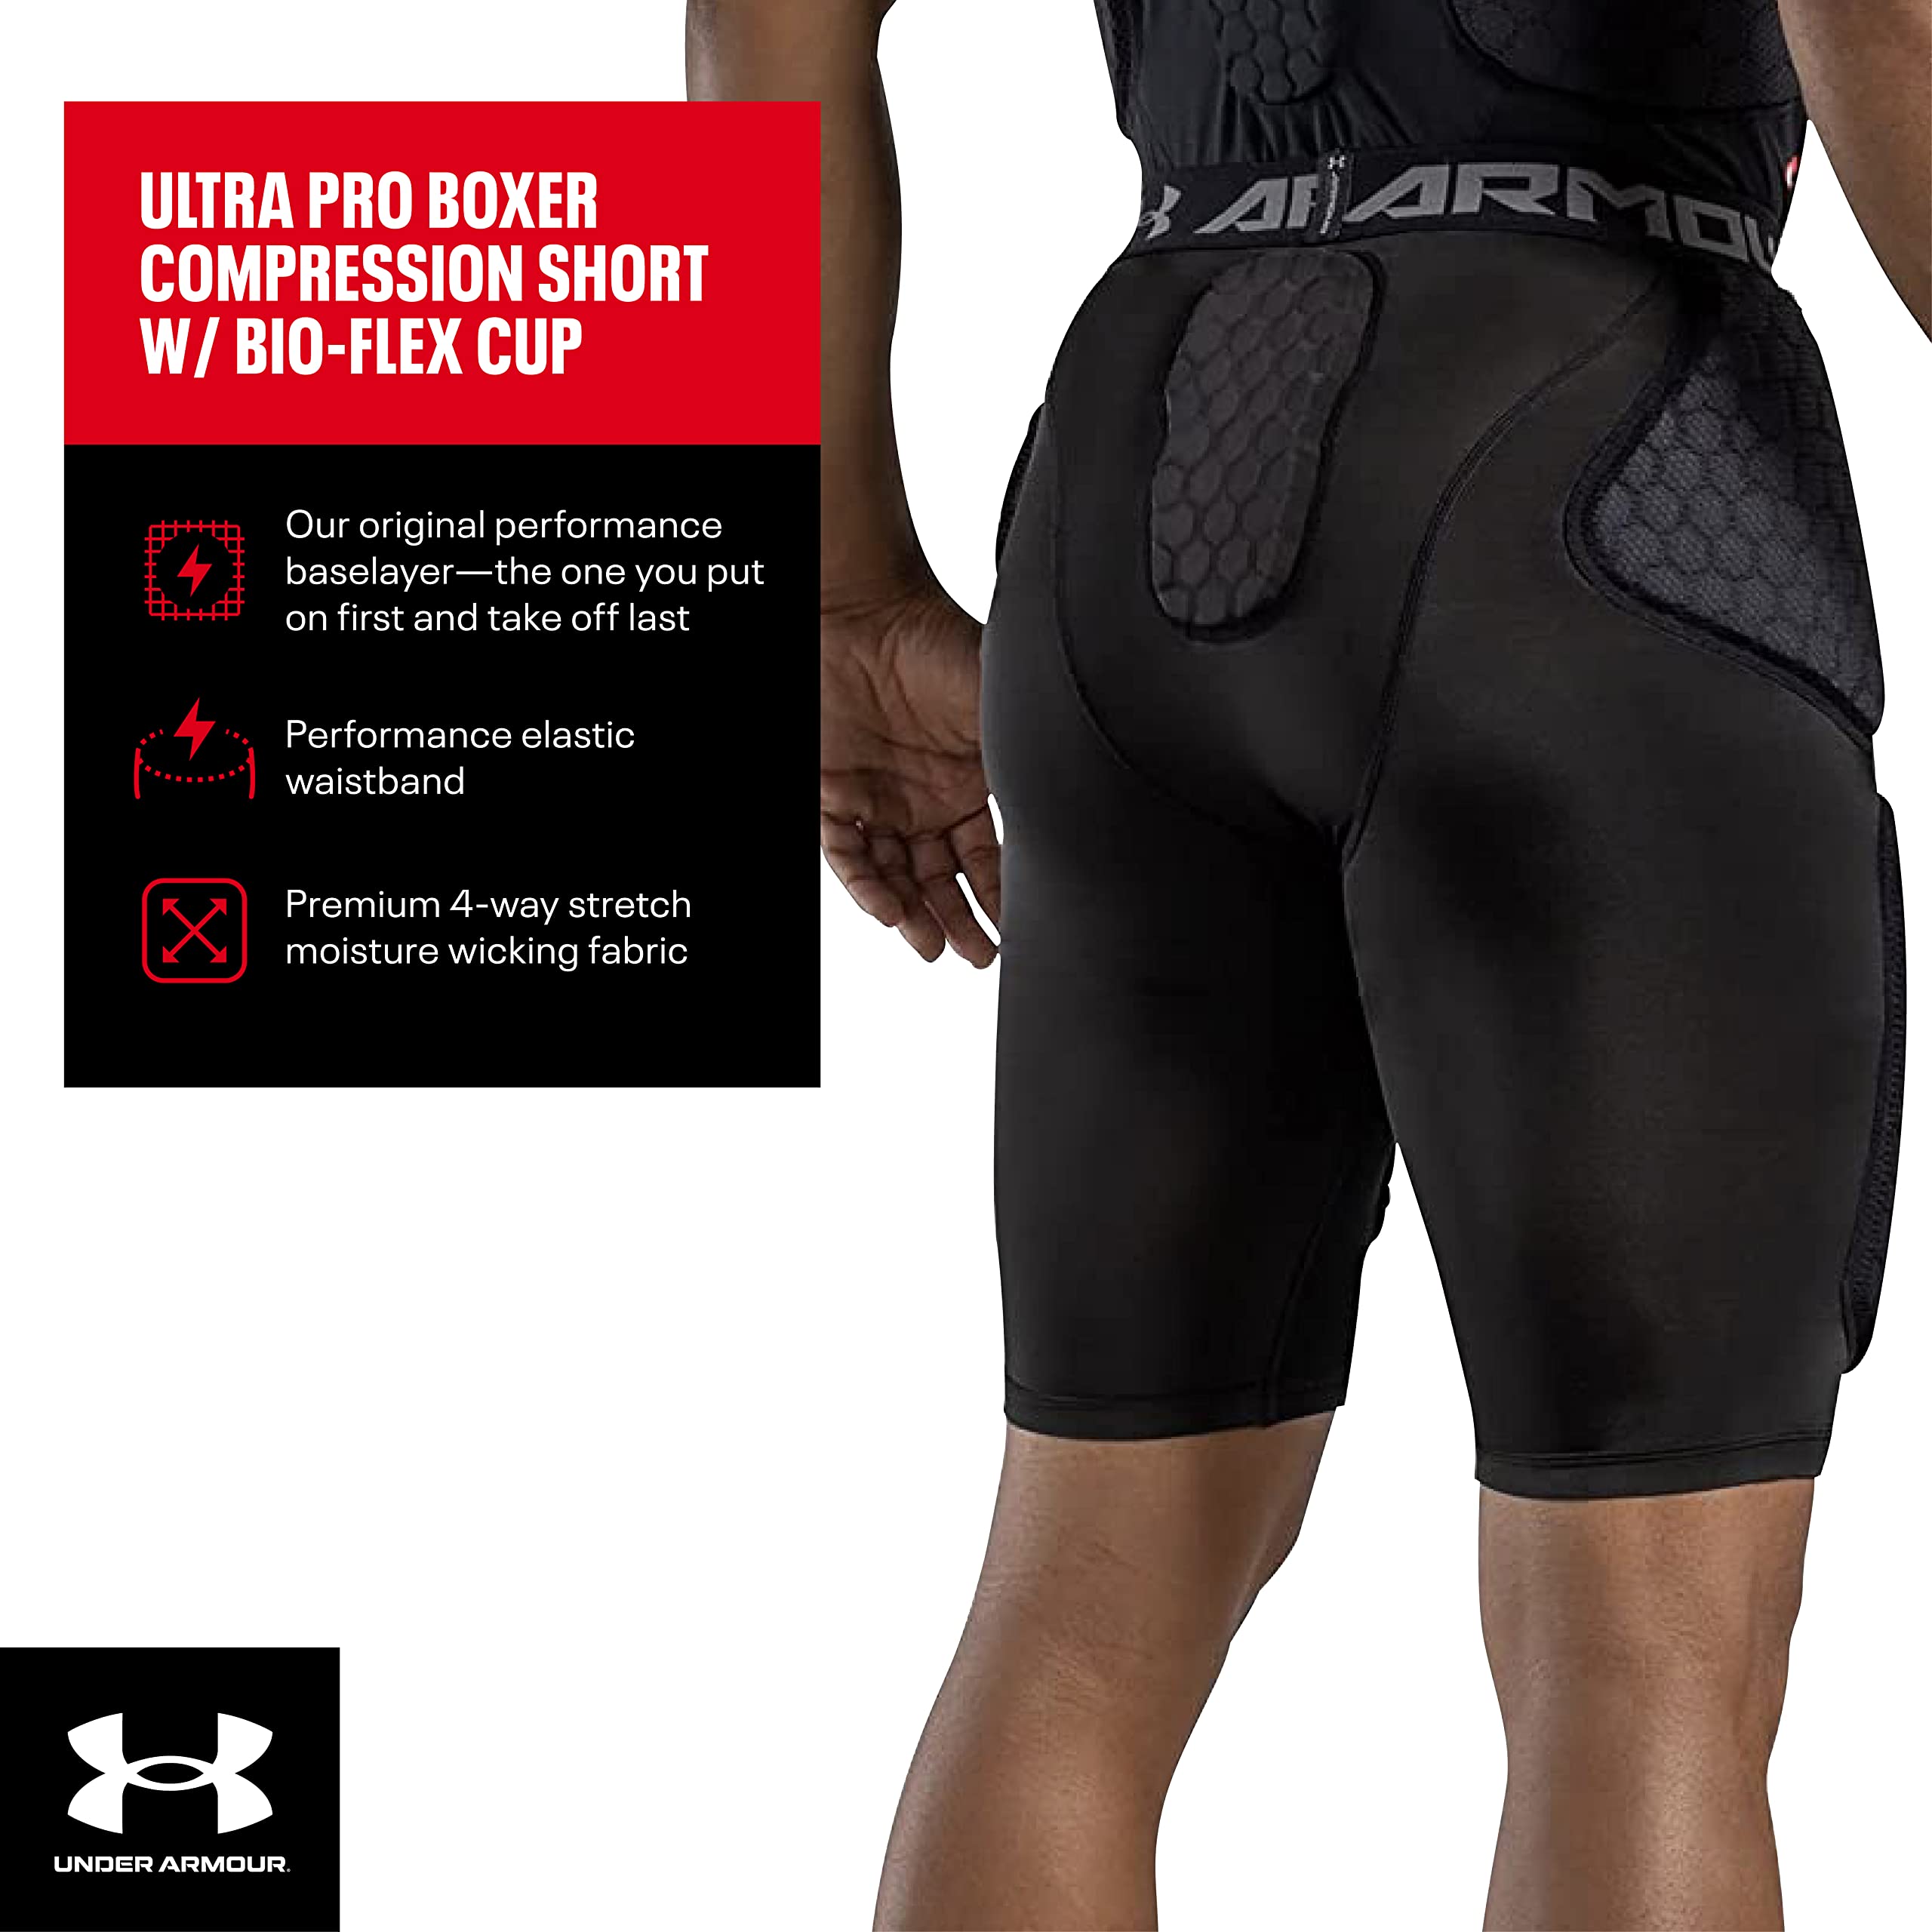 Under Armour 5-Pad Girdle Game Day Tights/Shorts with McDavid HEX Padded Leg Compression & Groin Protection